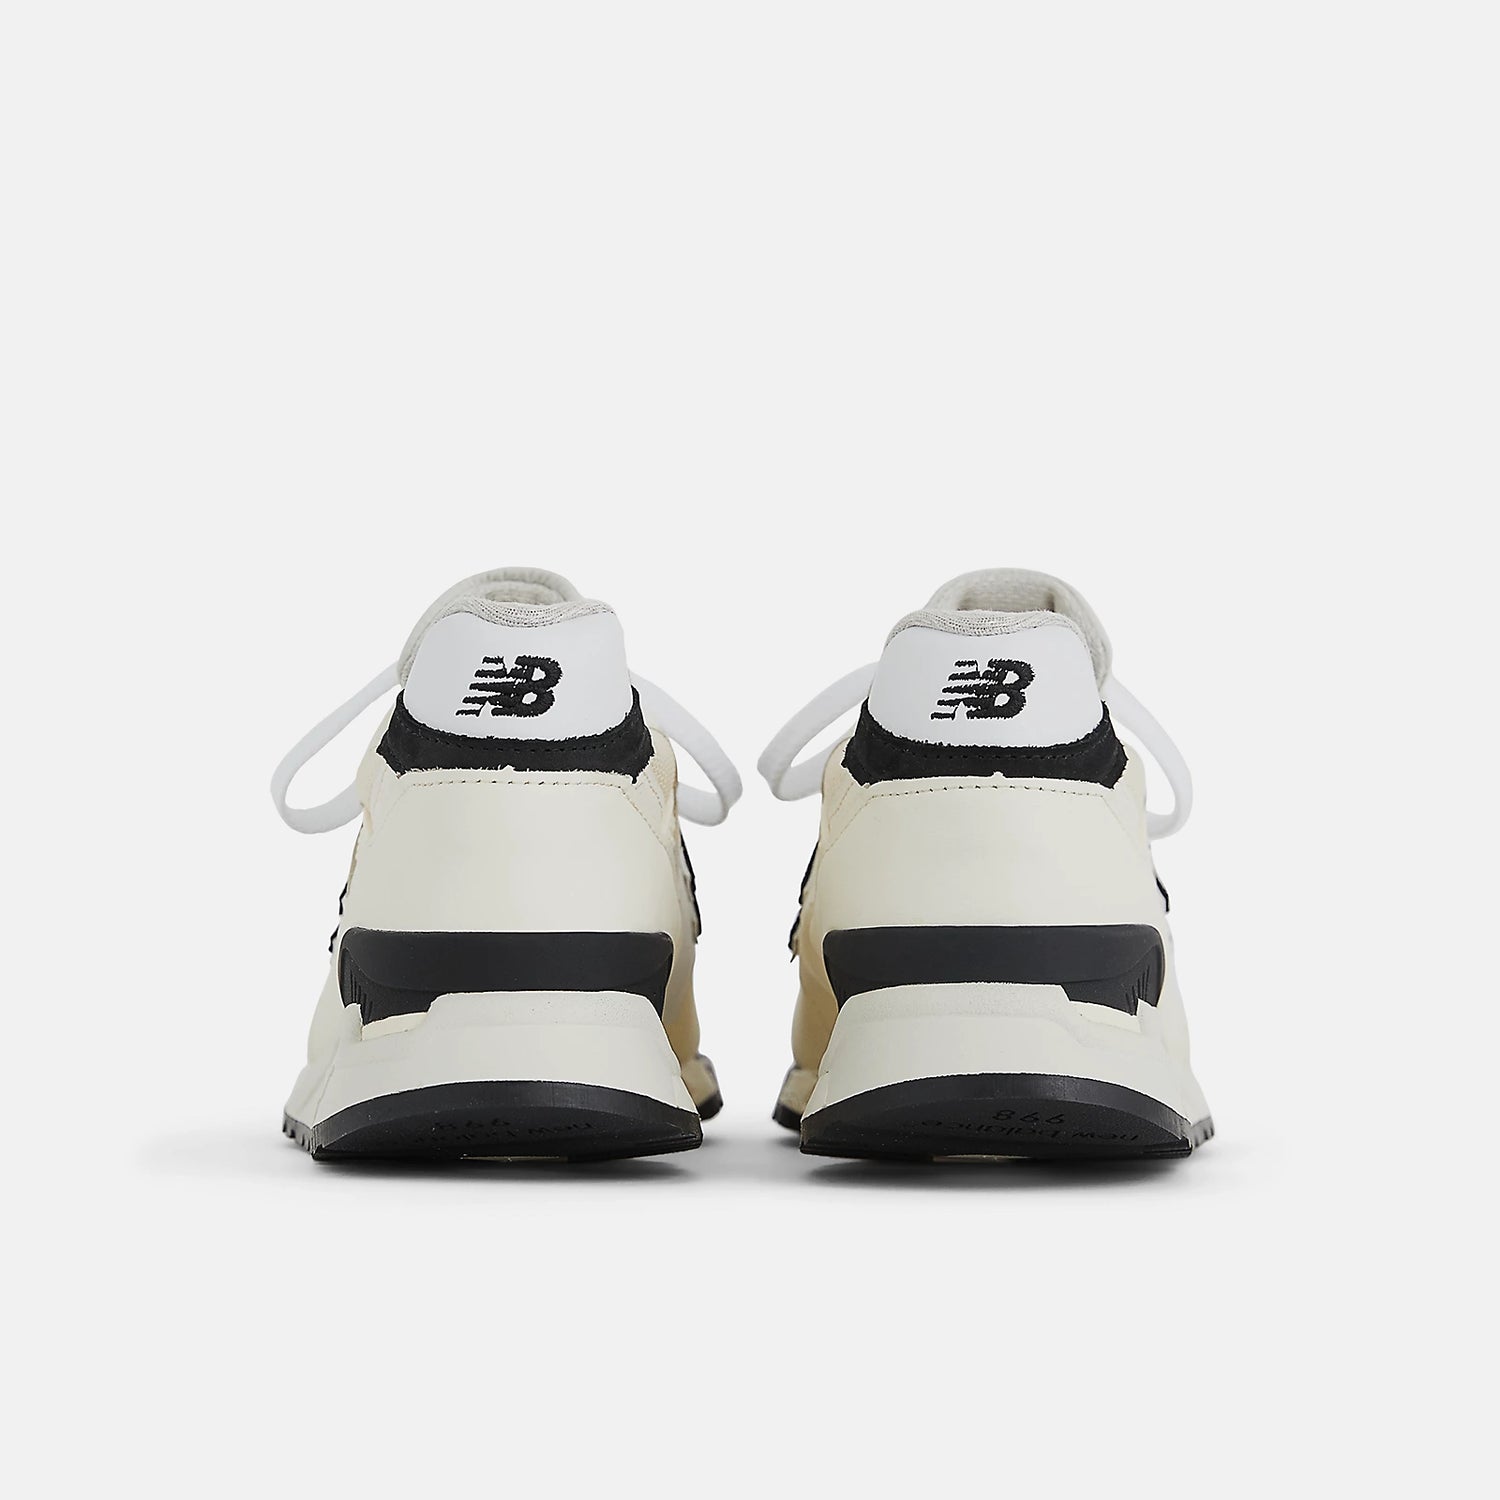 Classic New Balance 998 B/W Lacrosse Shoes - Front Back 